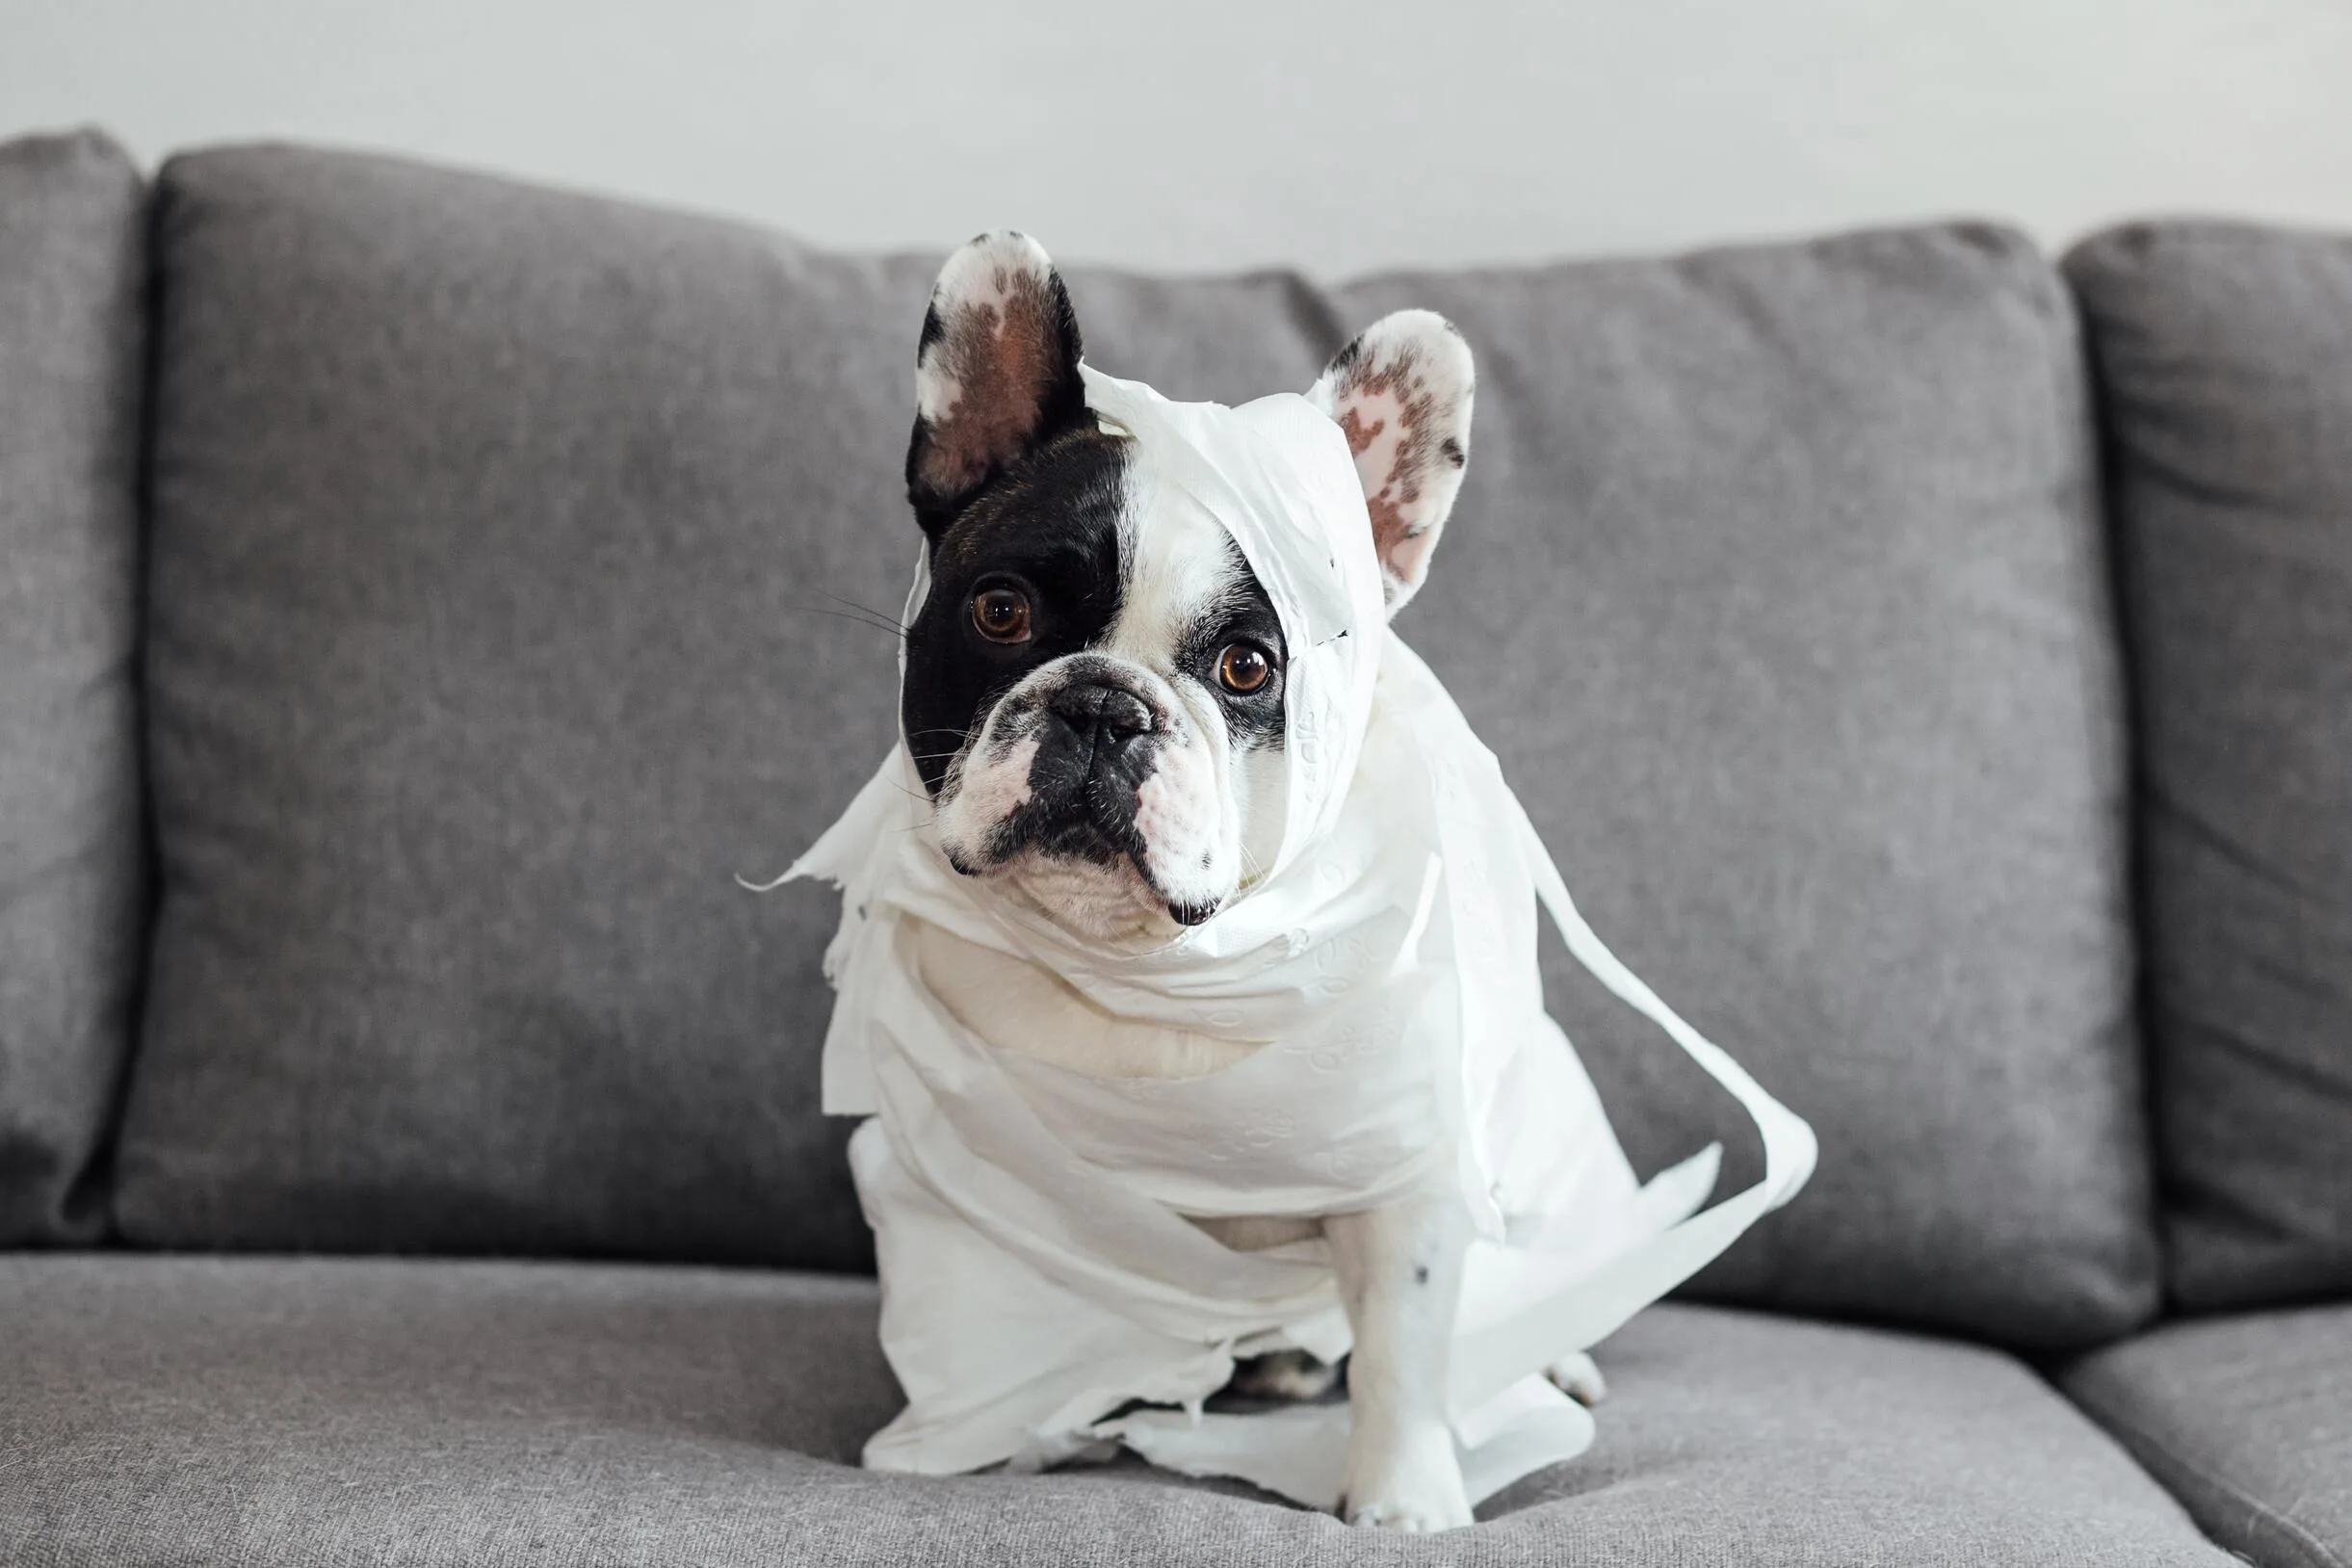 A CURE DOG IN A ROLE OF A TOILET PAPER